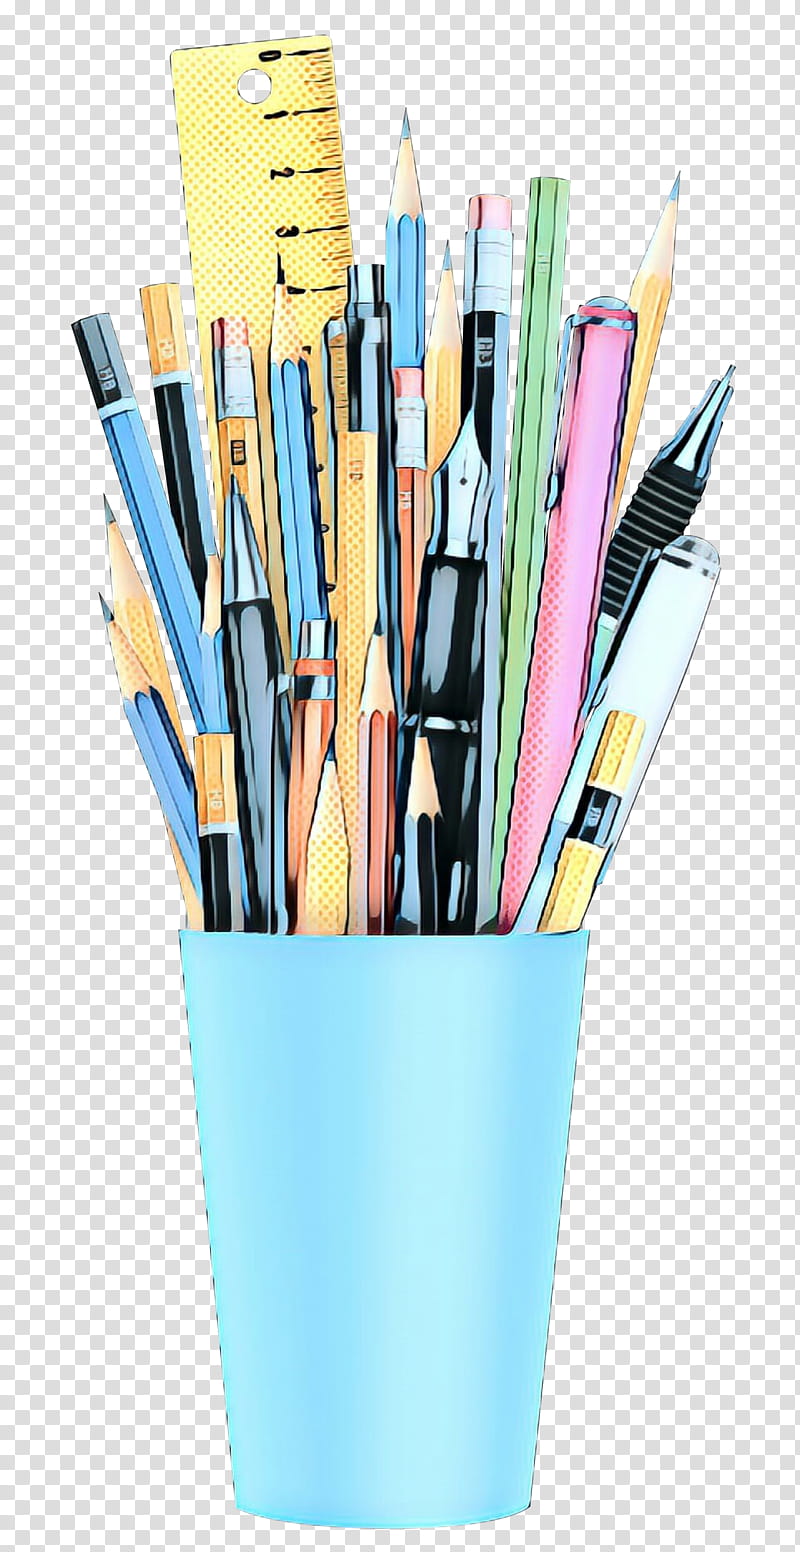 Pencil, Plastic, Turquoise, Brush, Office Supplies, Stationery, Writing Implement, Pencil Case transparent background PNG clipart